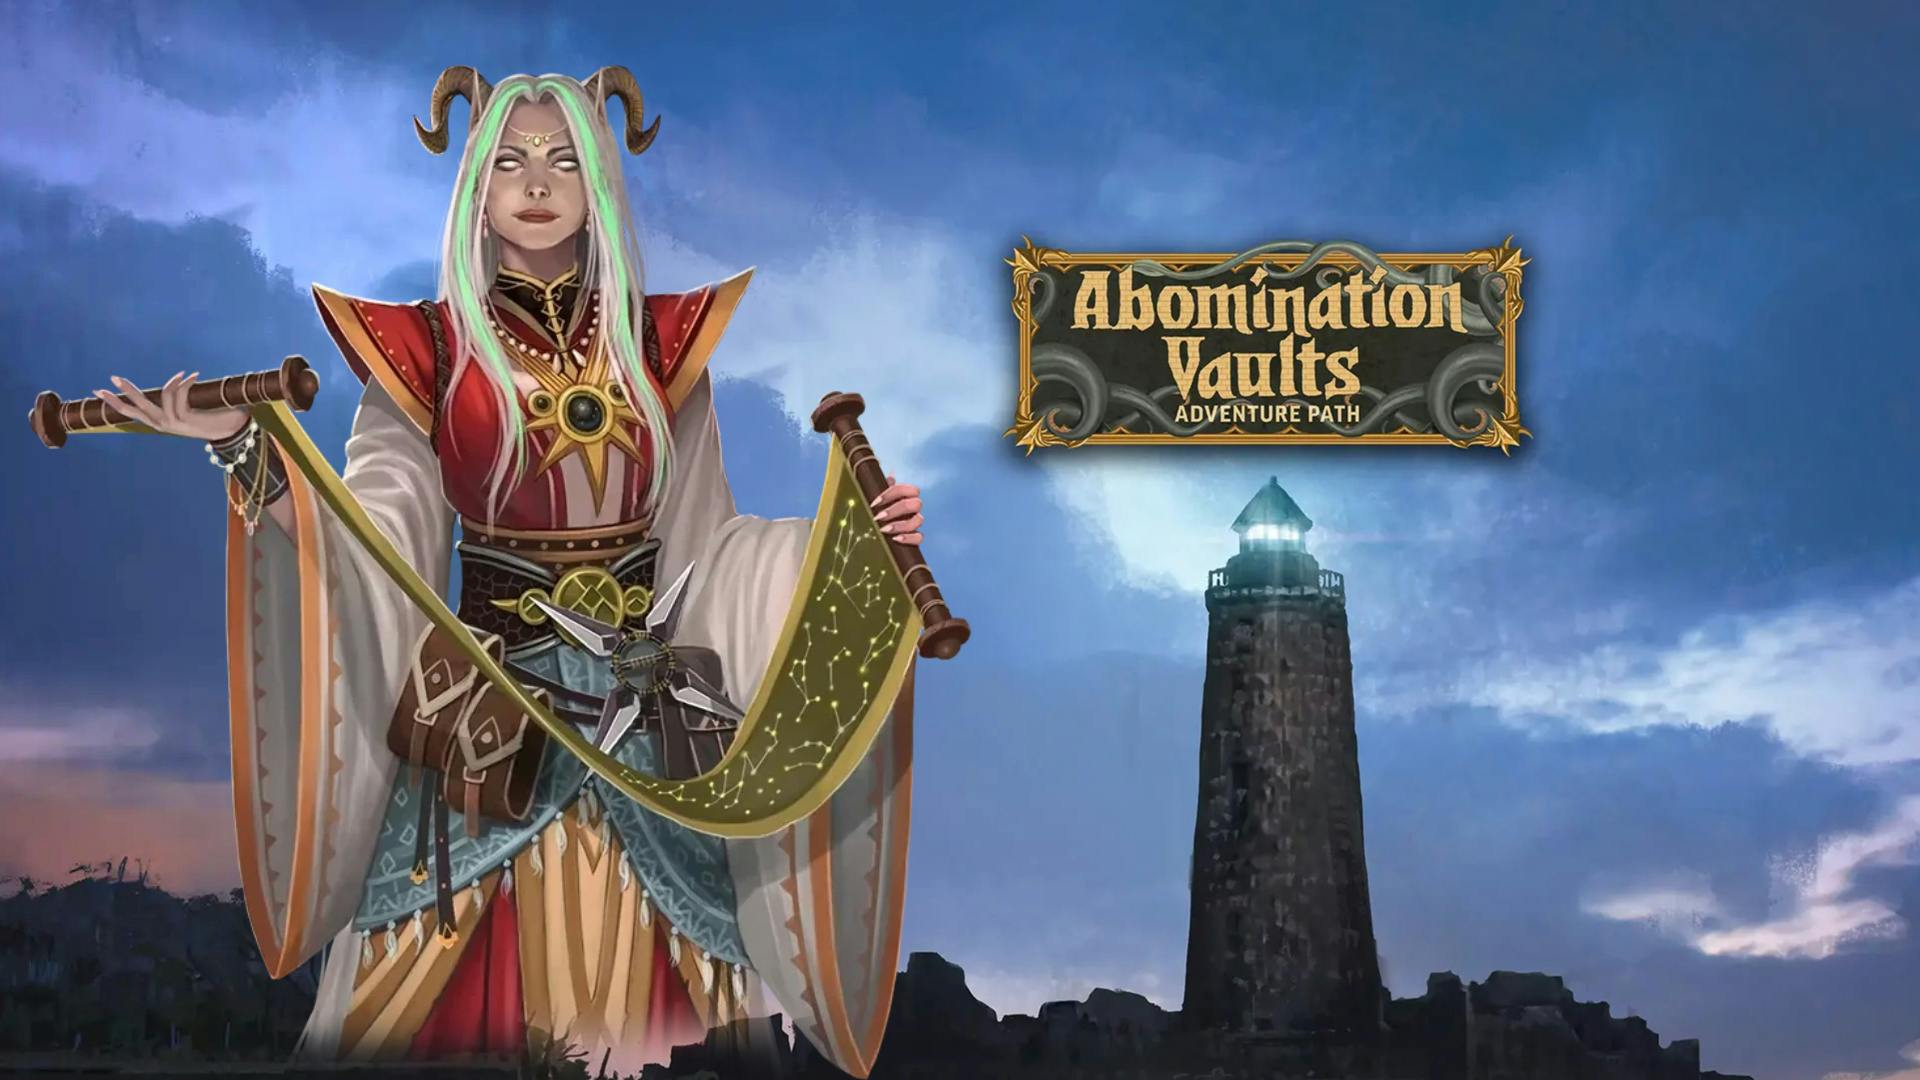 🌊⛯ Illuminate a seaside town's shadowy past in the Abomination Vaults! | Pathfinder 2e Mystery Megadungeon